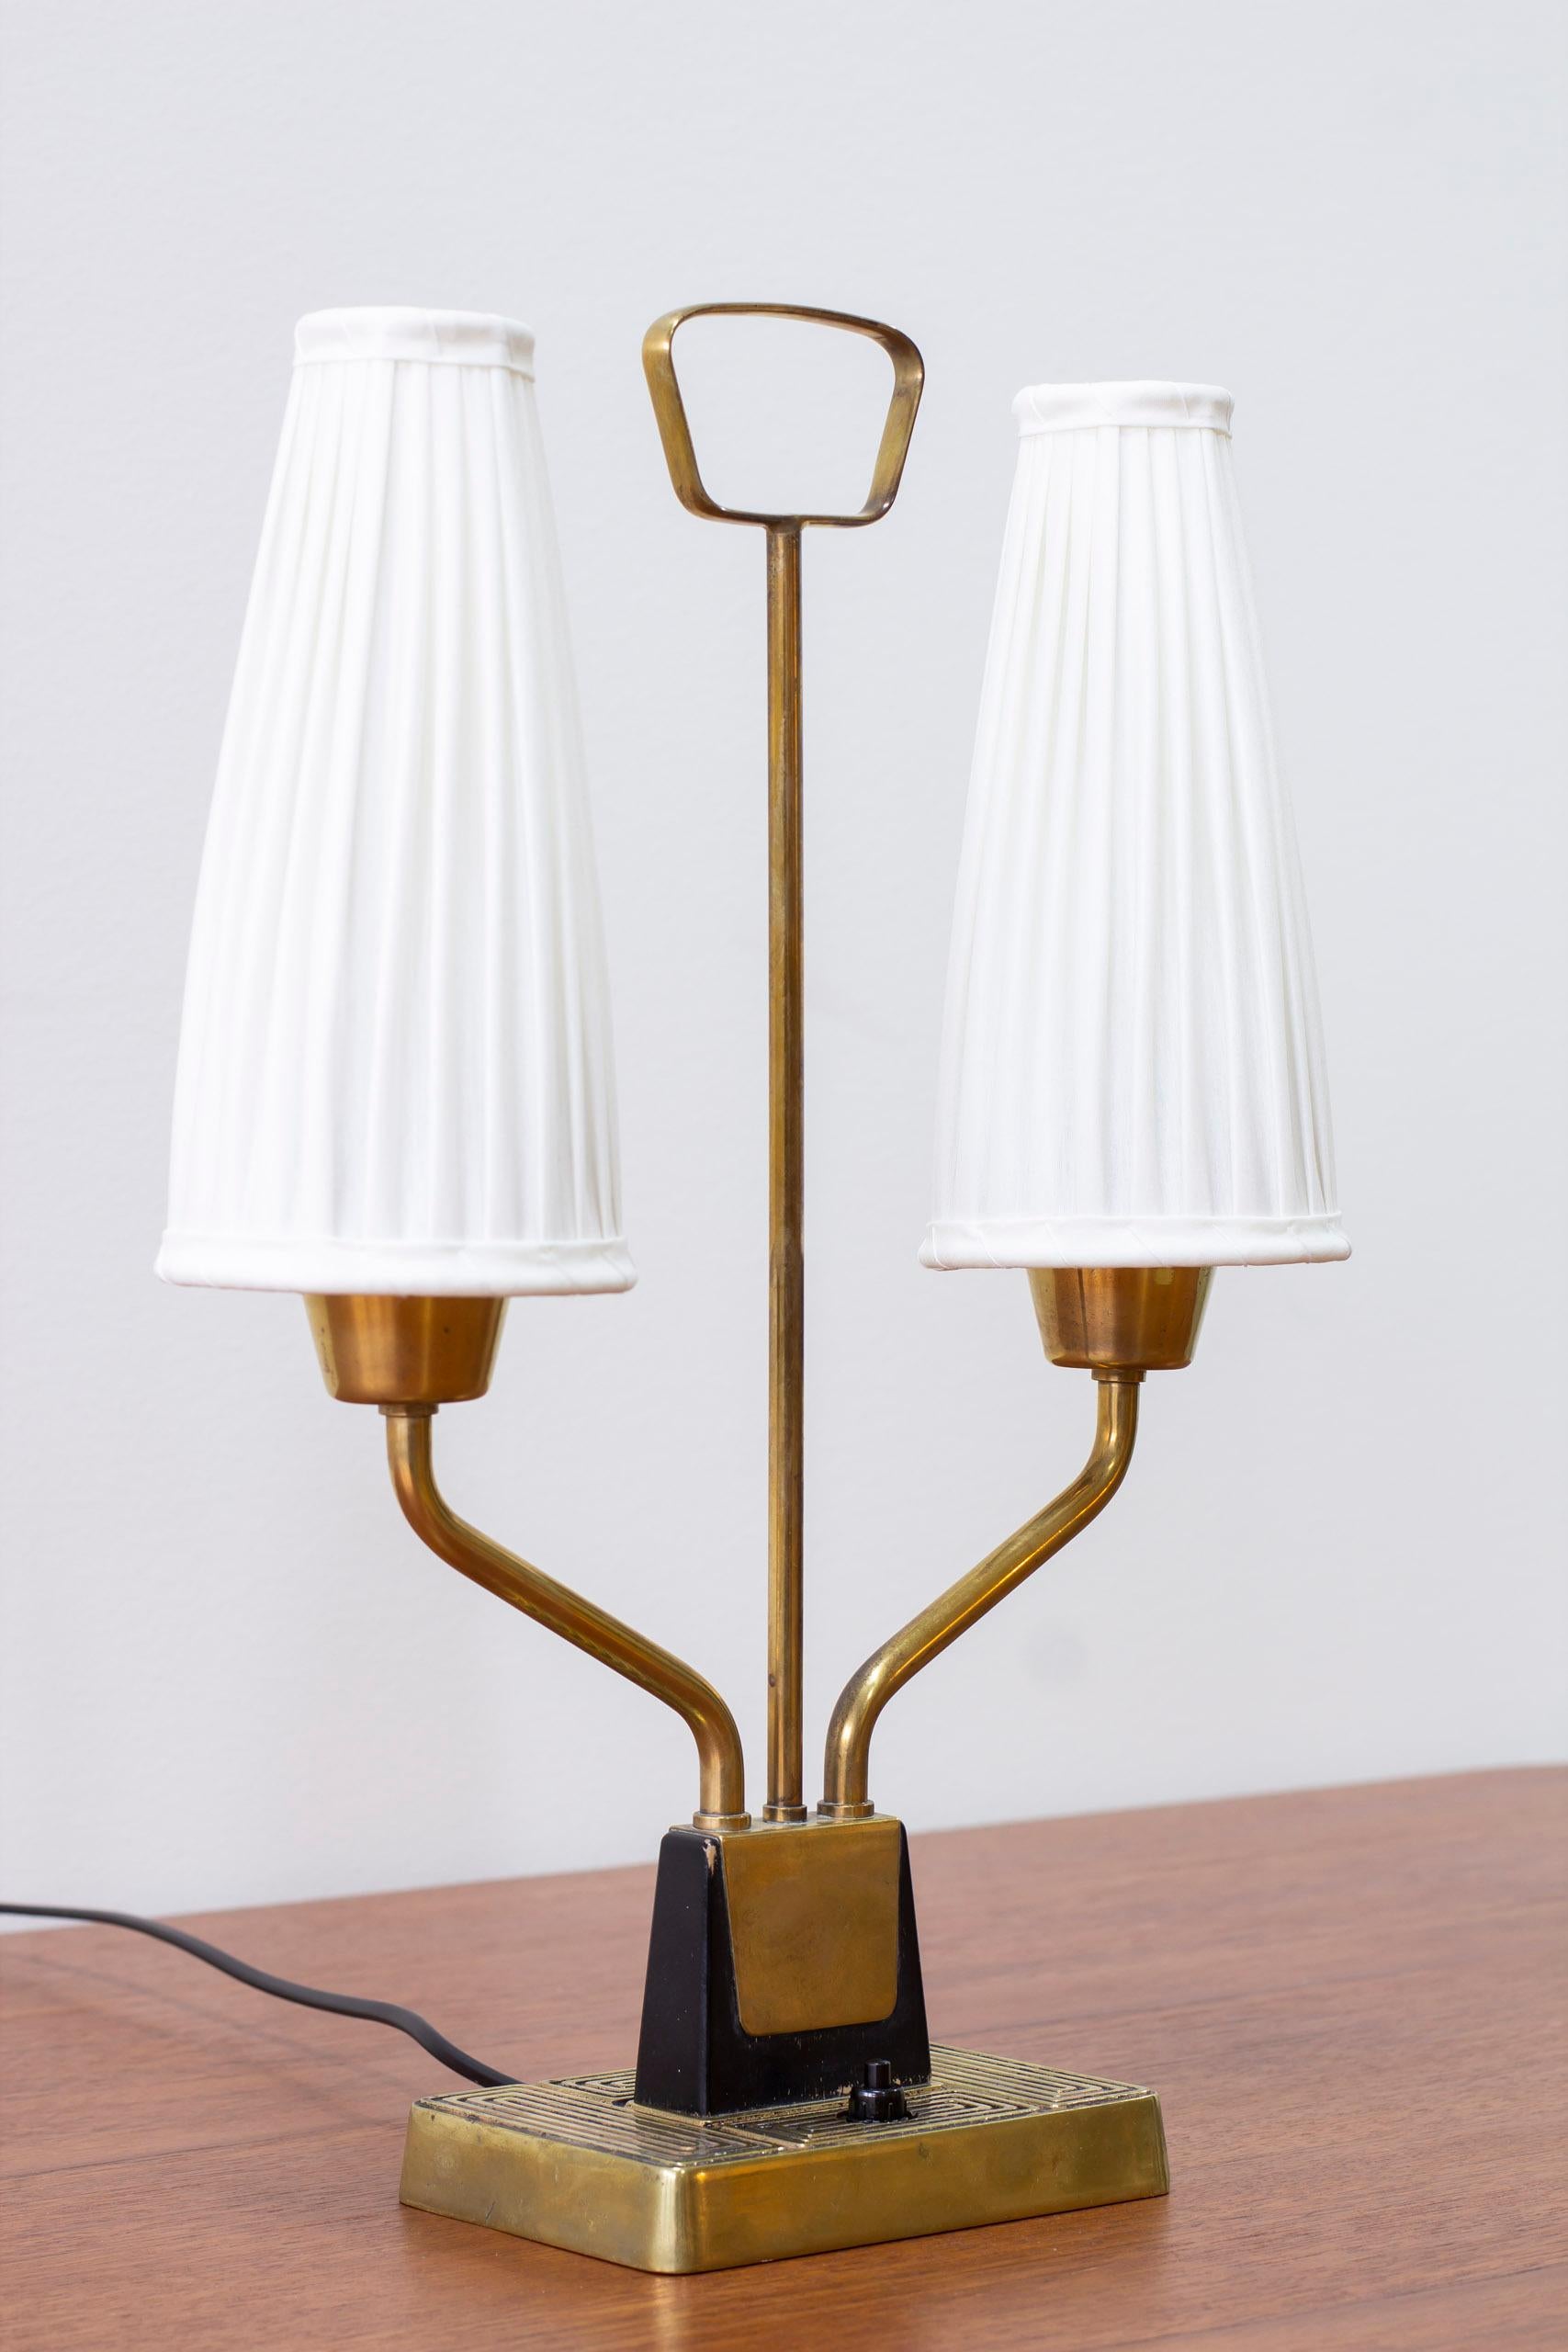 Brass table lamp by ASEA belysning, Sweden, 1950s For Sale 6